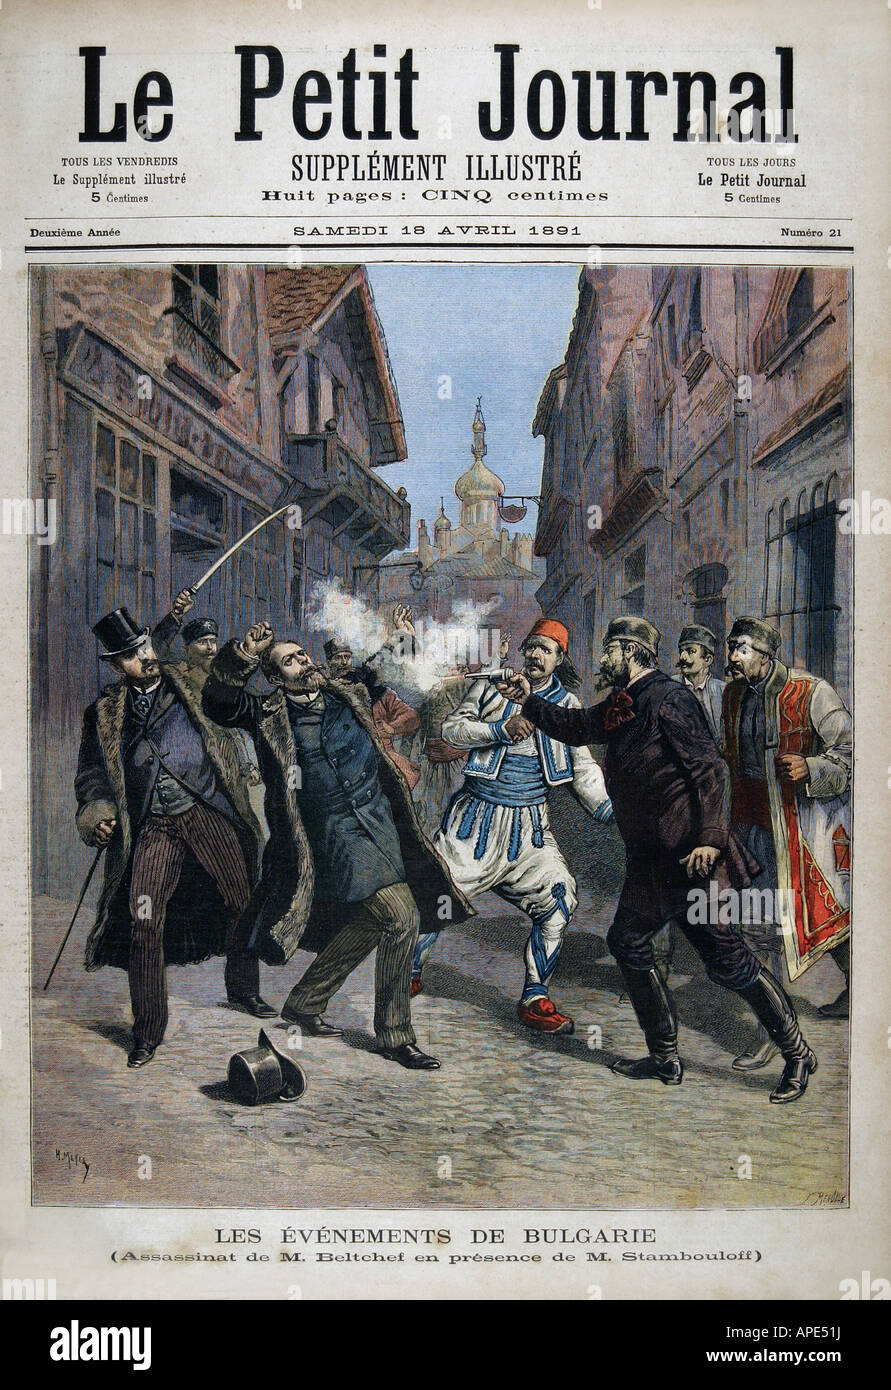 press/media, magazines, 'Le Petit Journal', Paris, 2. volume, number 21, illustrated supplement, Saturday 18 April 1891, title, 'The events in Bulgaria', , Stock Photo